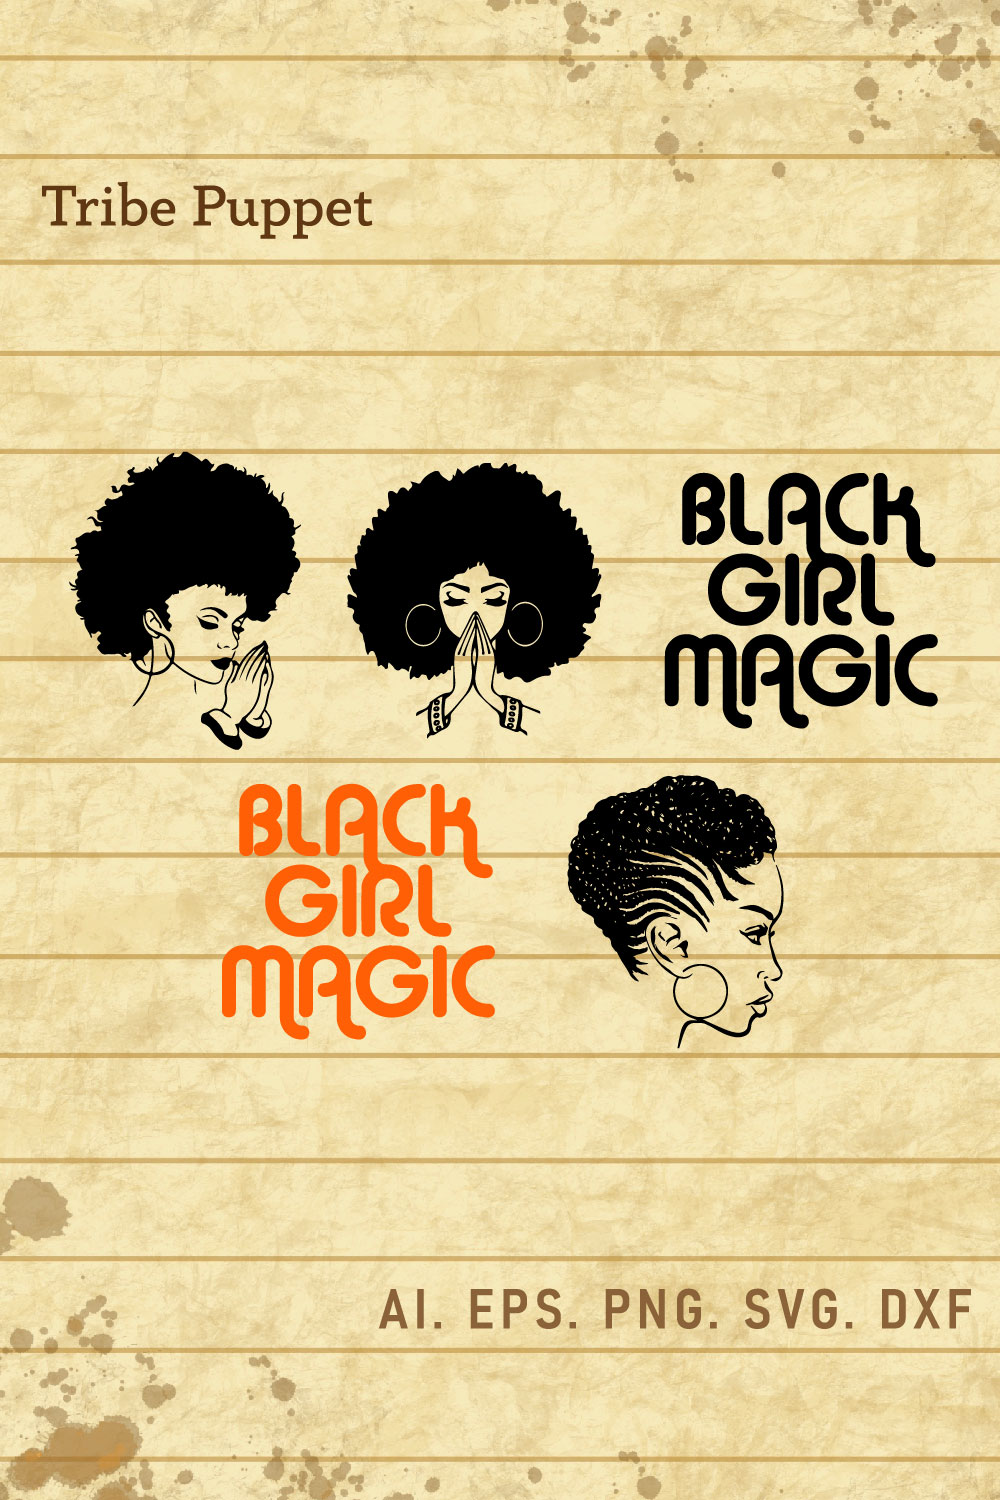 Afro Woman pinterest preview image.